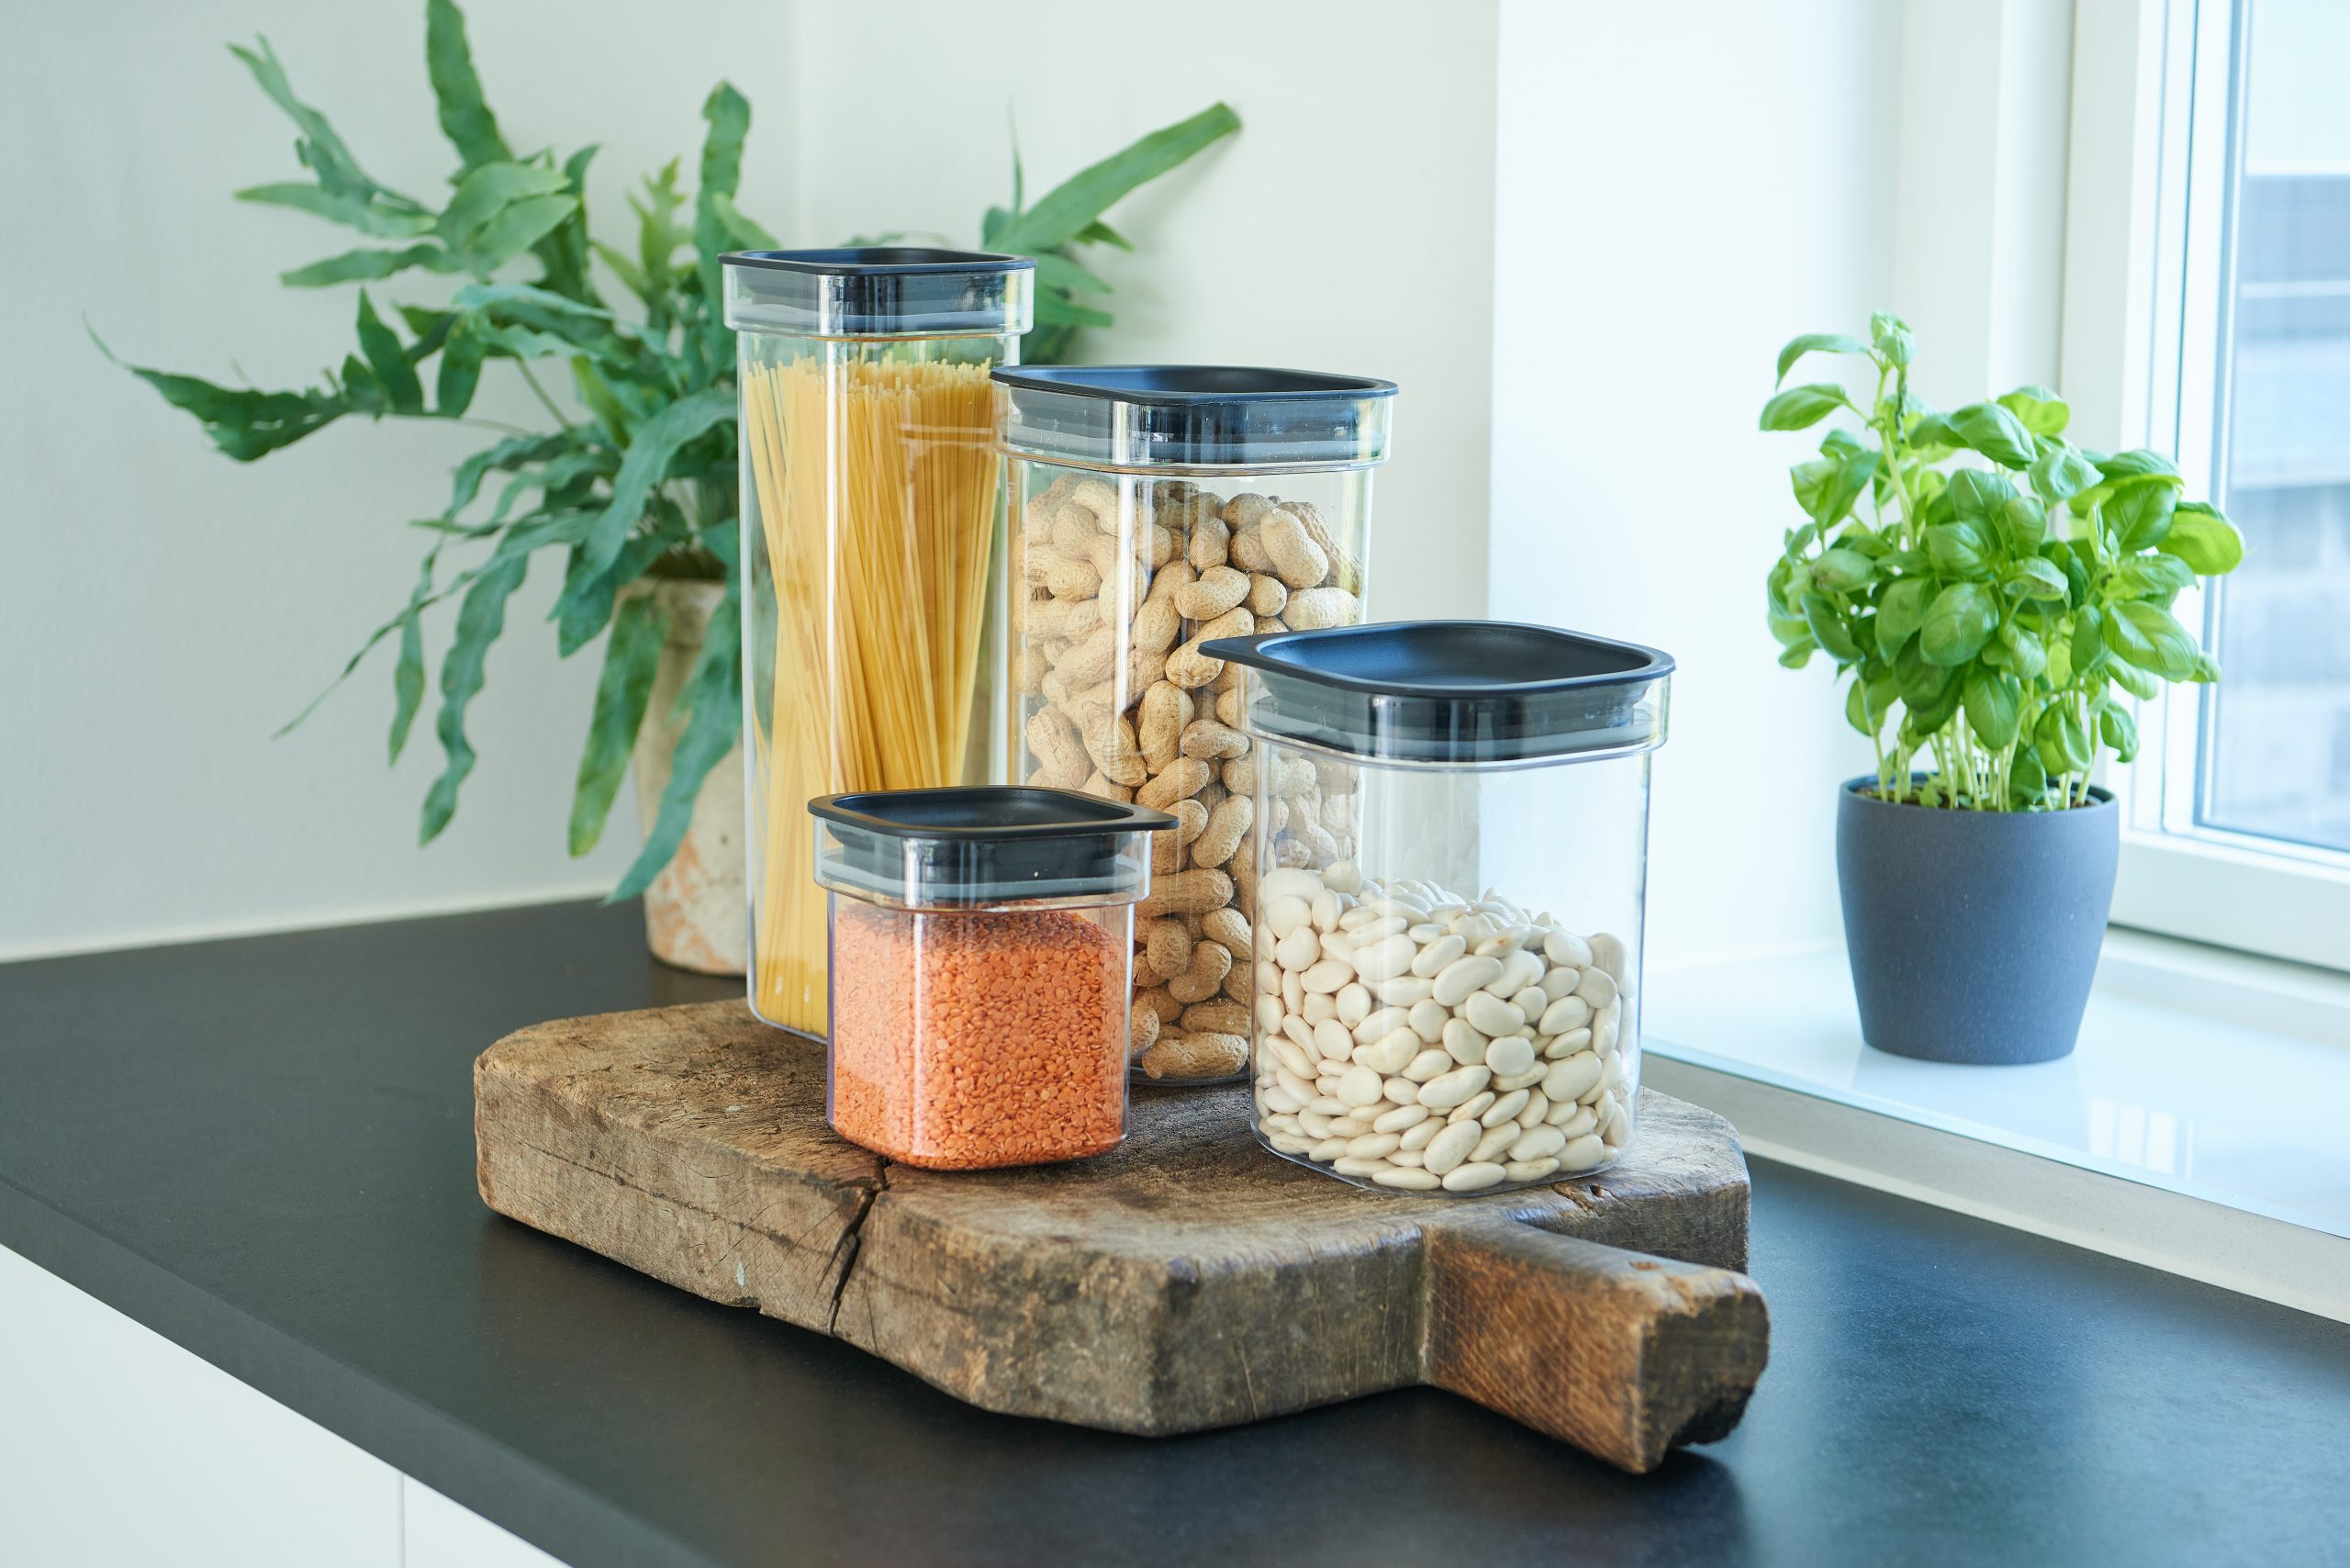 Hamburg is an elegant series of canisters for storing dry food. Containers have round corners and are available in 4 sizes.